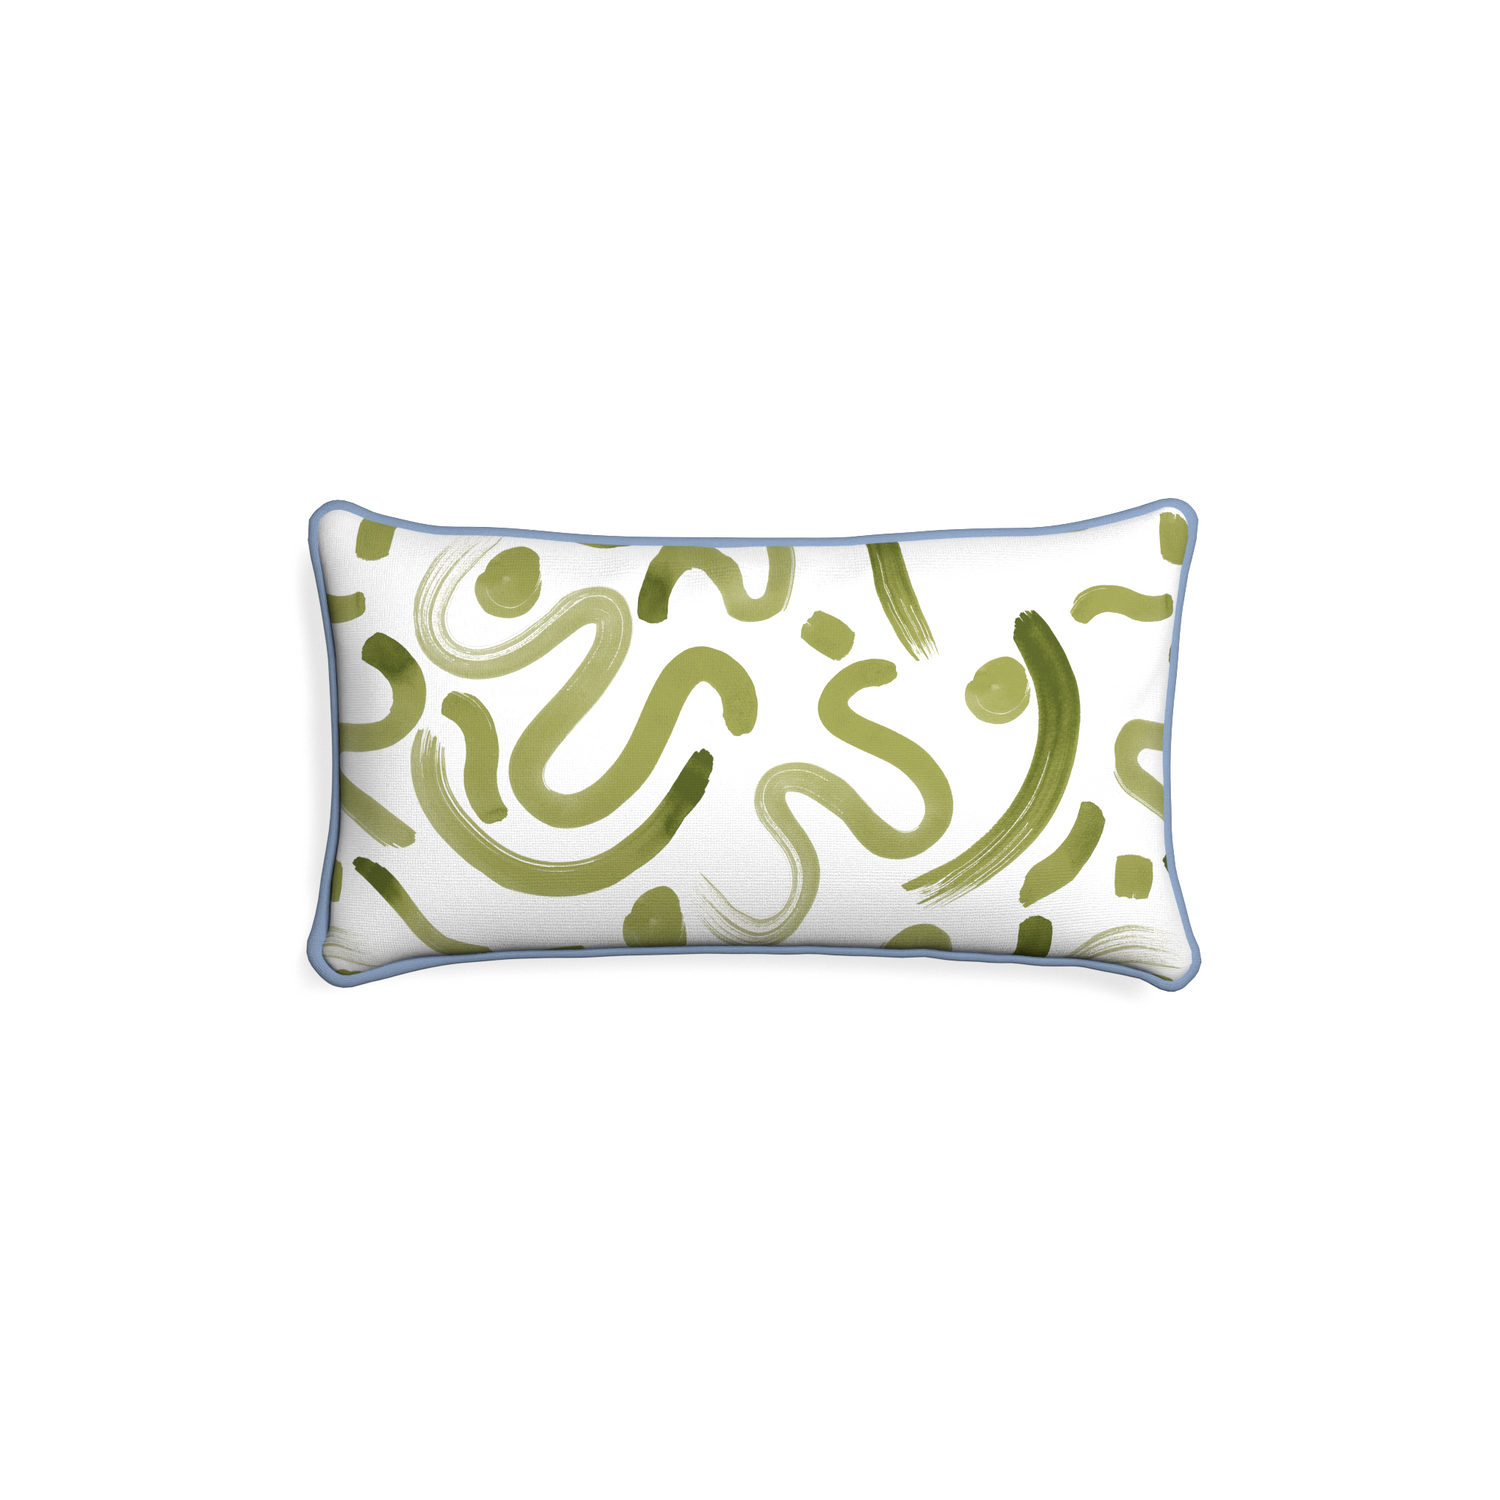 Petite-lumbar hockney moss custom moss greenpillow with sky piping on white background